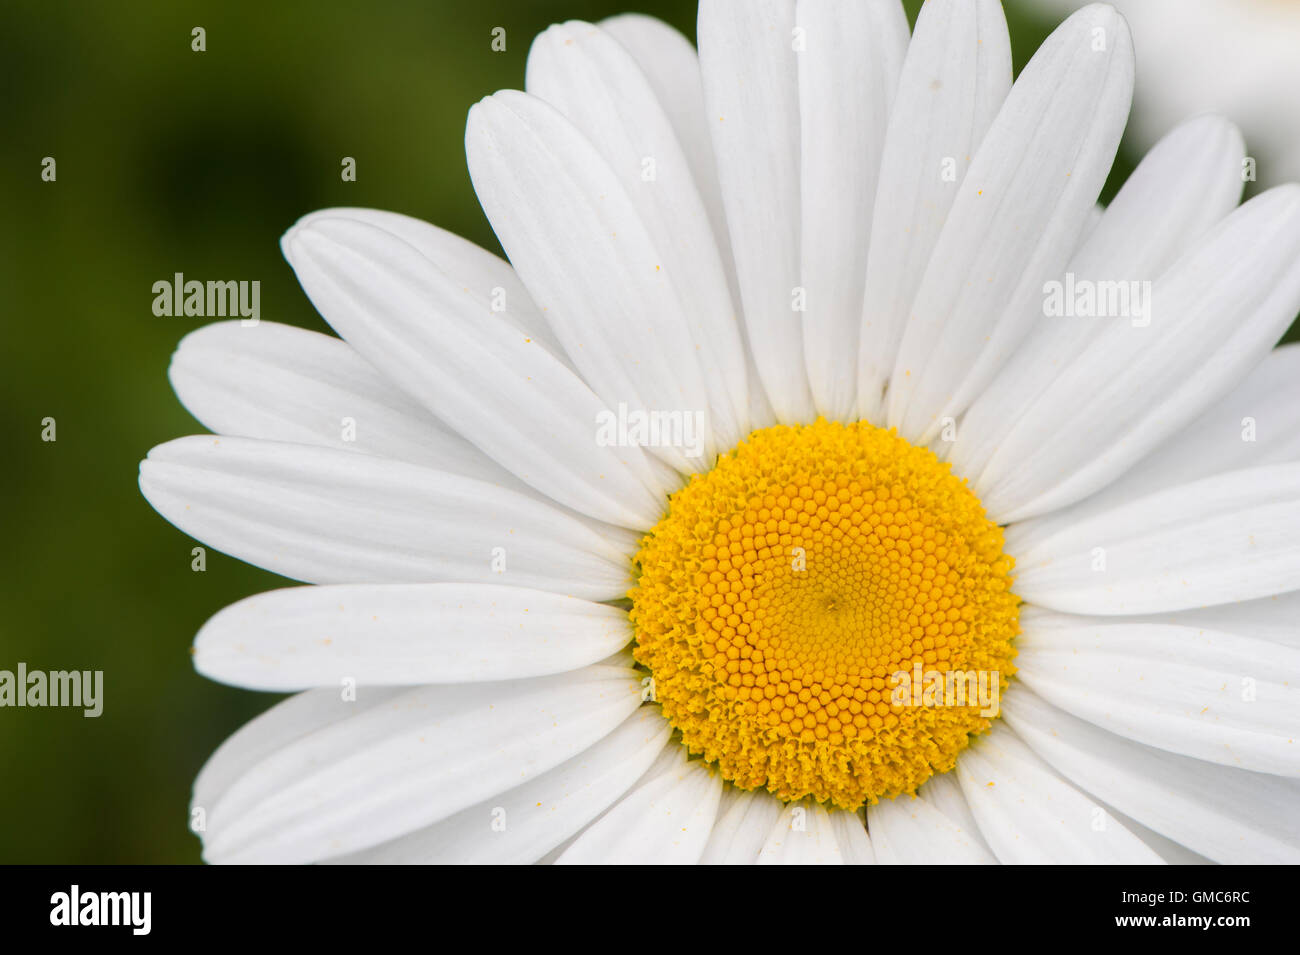 Close-up detail of a beautiful, showy, flower head belonging to an ox-eye daisy or marguerite, (Leucanthemum vulgare) - England. Stock Photo